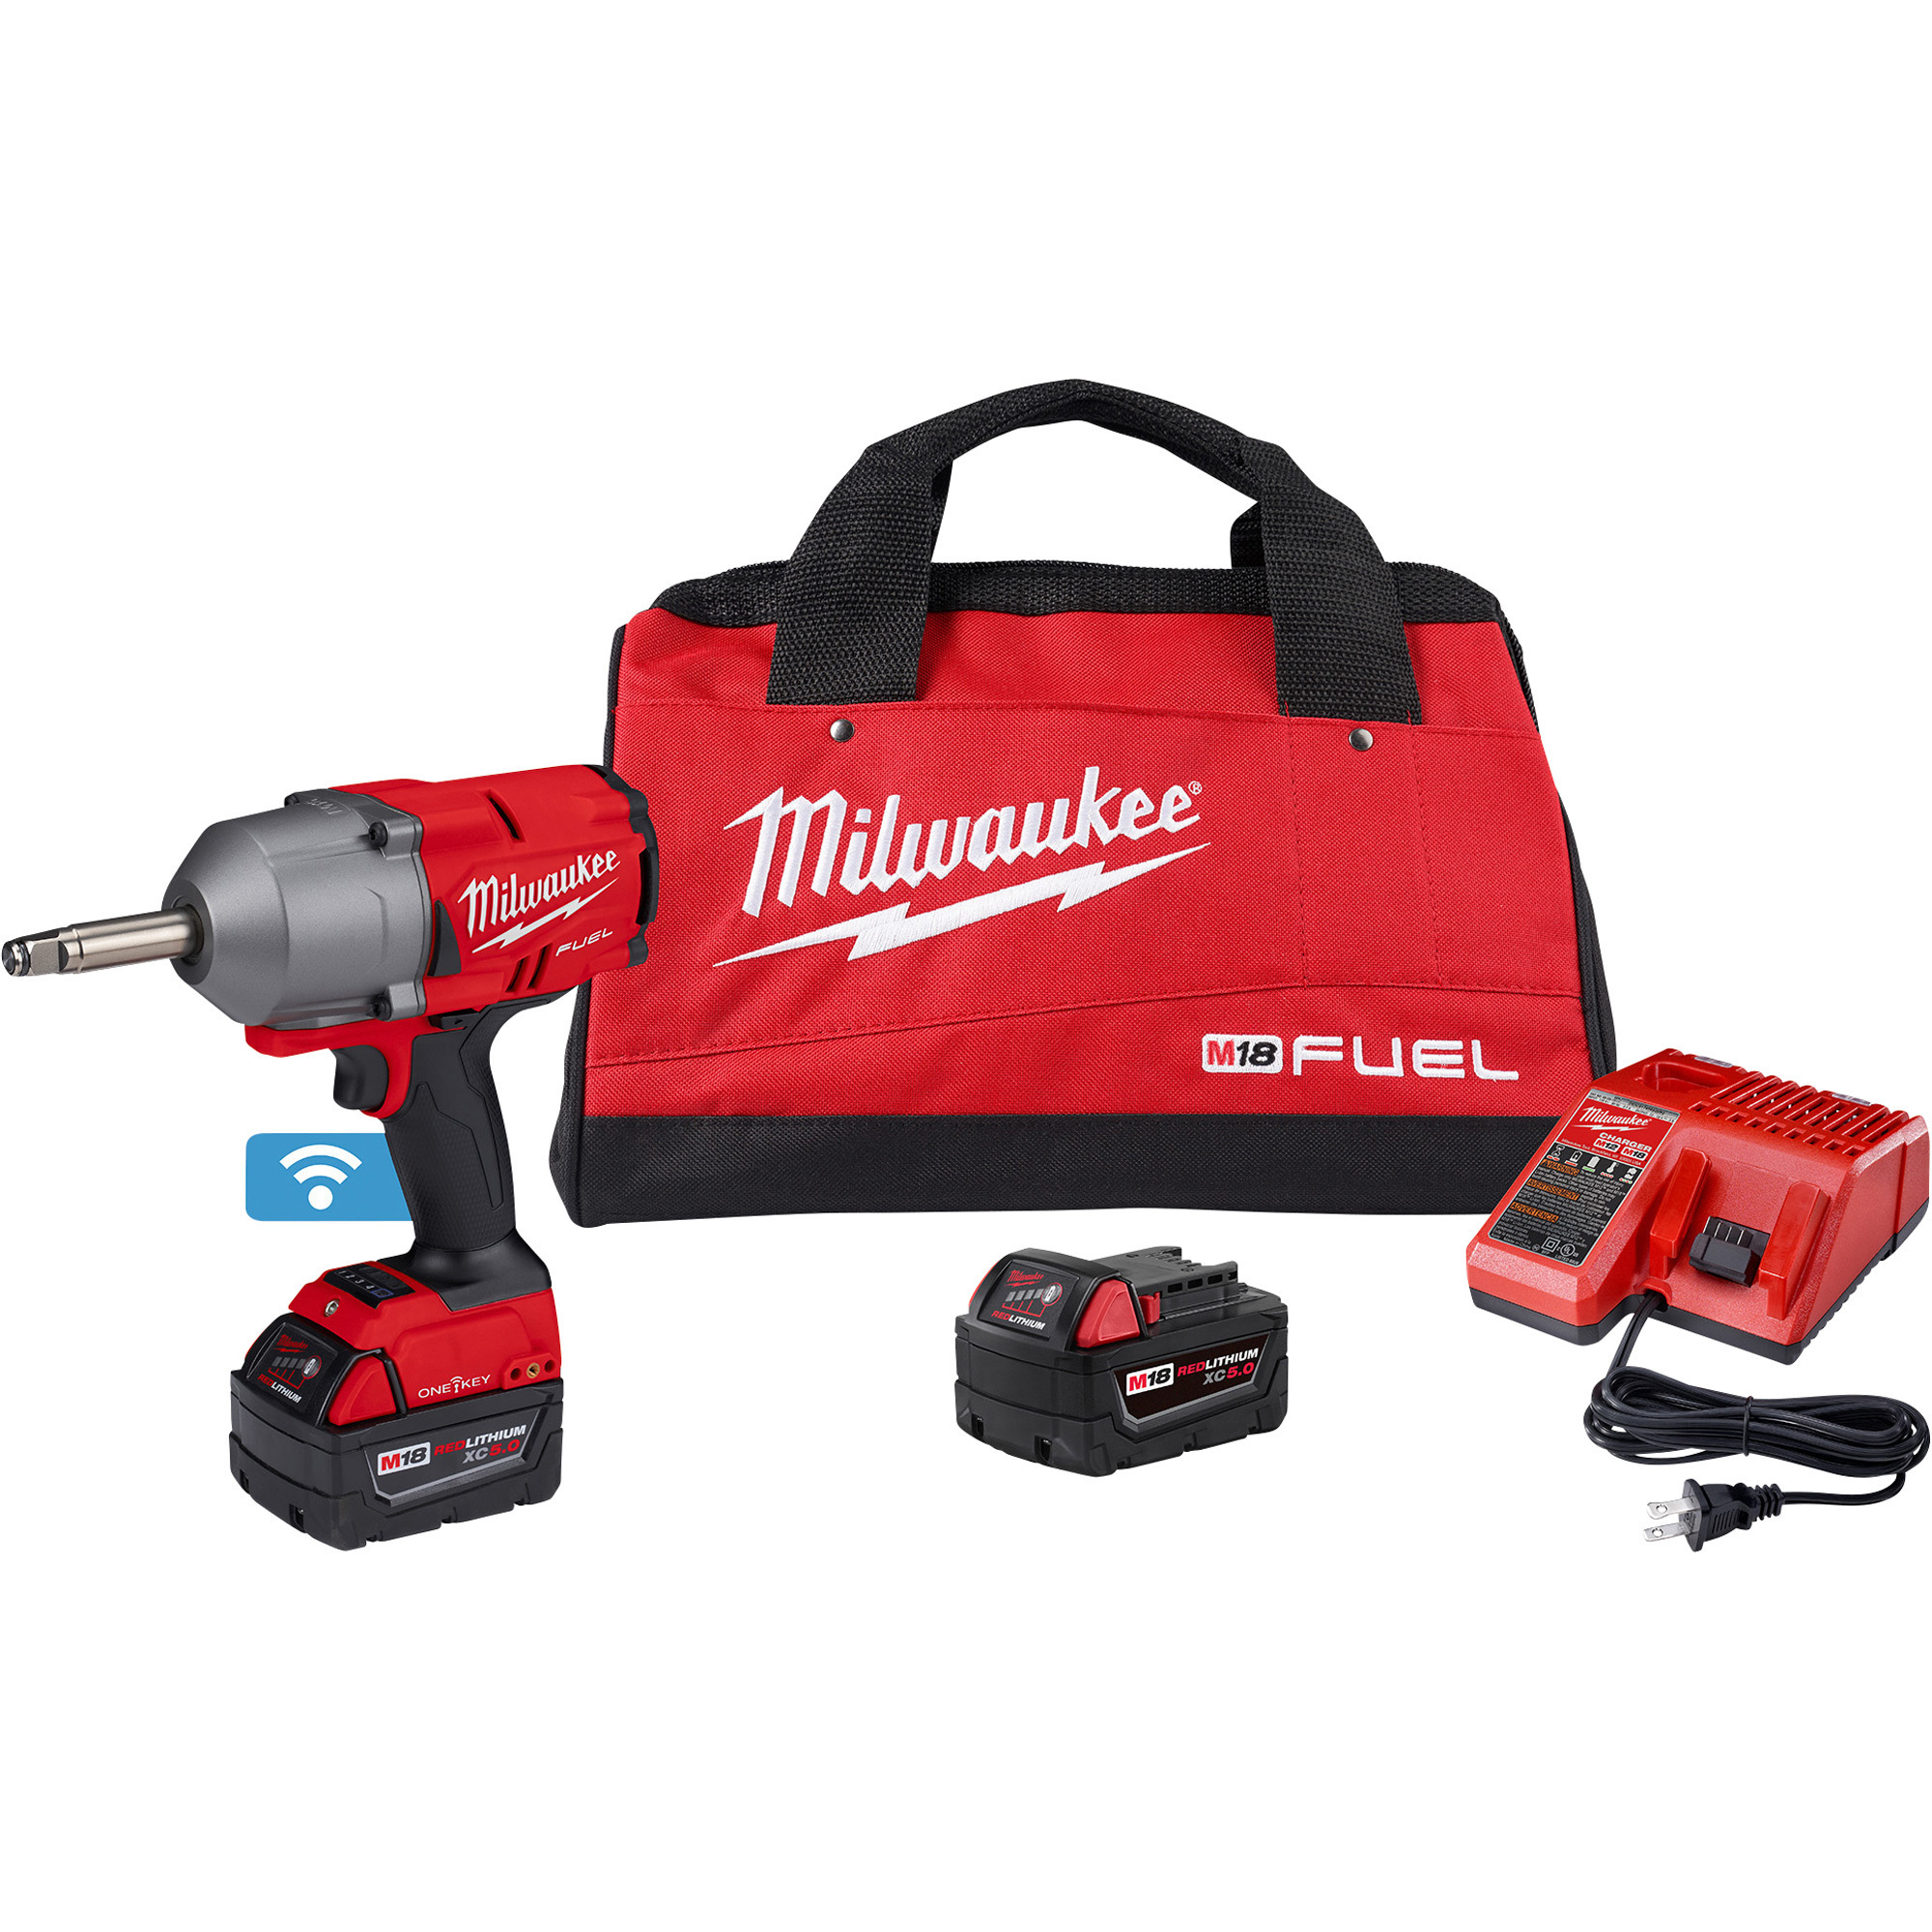 Milwaukee M18 FUEL Cordless Ext. Anvil Controlled Torque Impact Wrench Kit with ONE-KEY — 1/2Inch Drive, 1100 Ft./Lbs. Torque, 2 Batteries, Model 2769 -  2769-22R